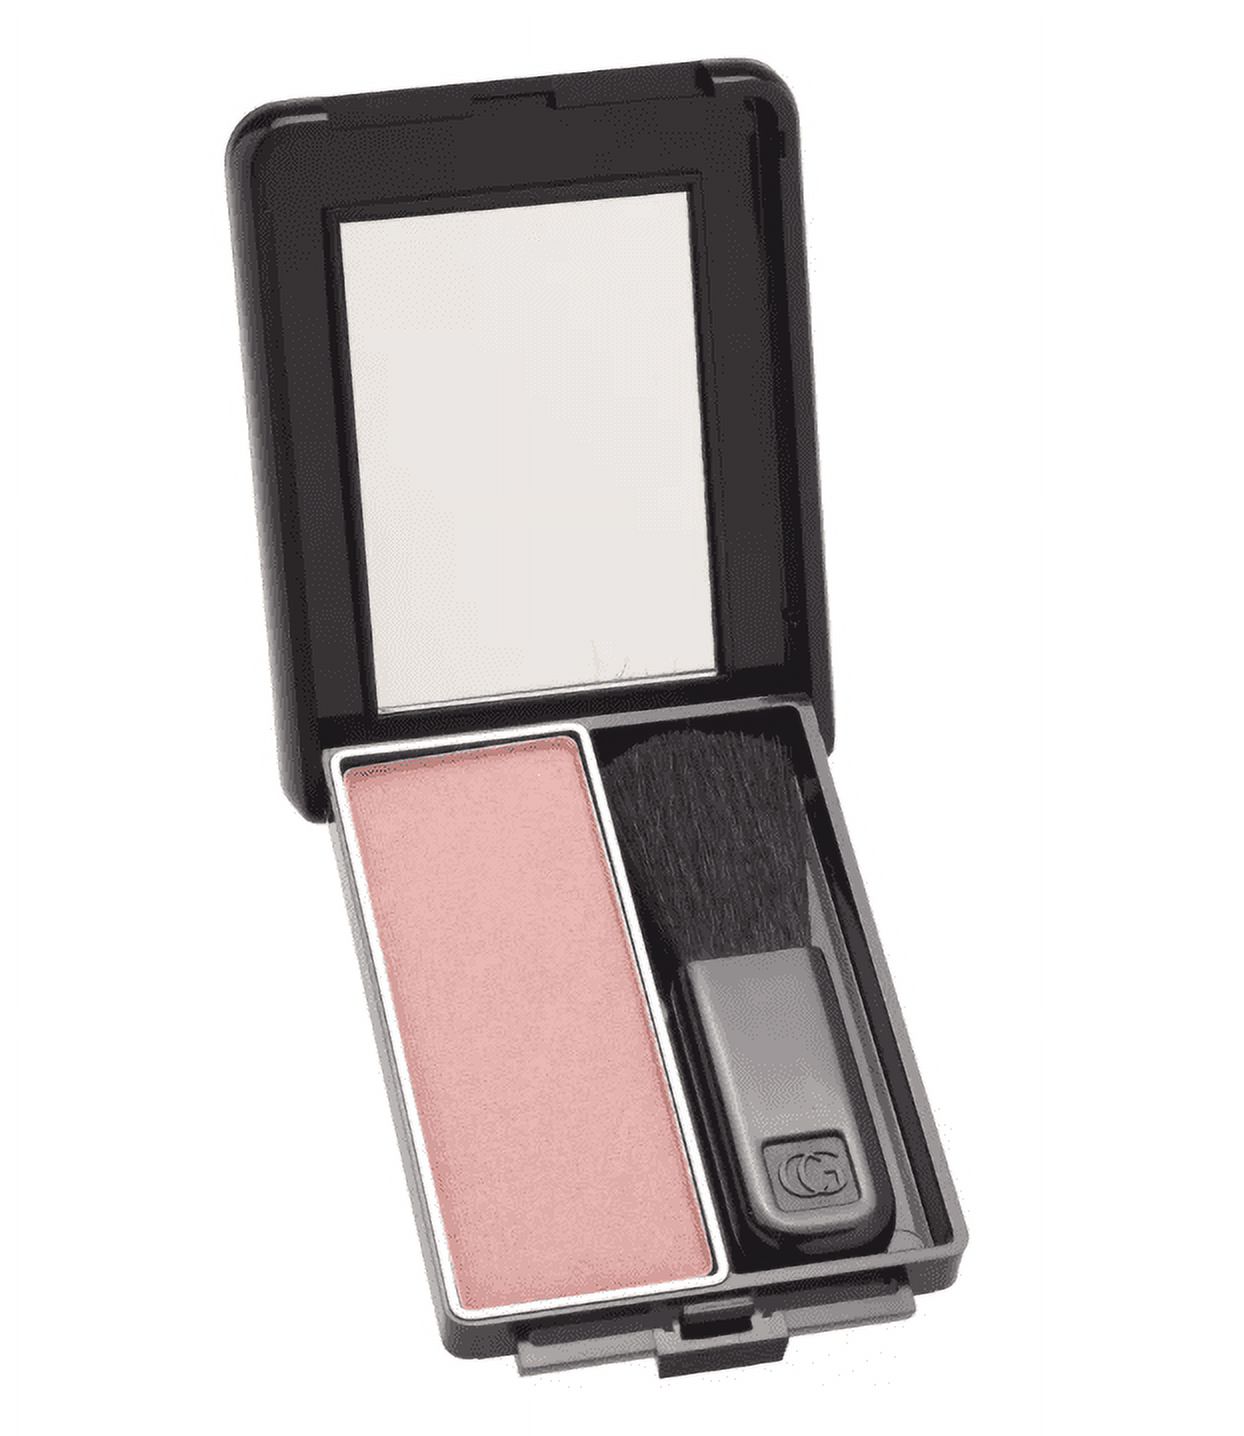 COVERGIRL Classic Color Powder Blush, 540 Rose Silk, 0.3 oz, Long Lasting Glowing Color - image 1 of 5